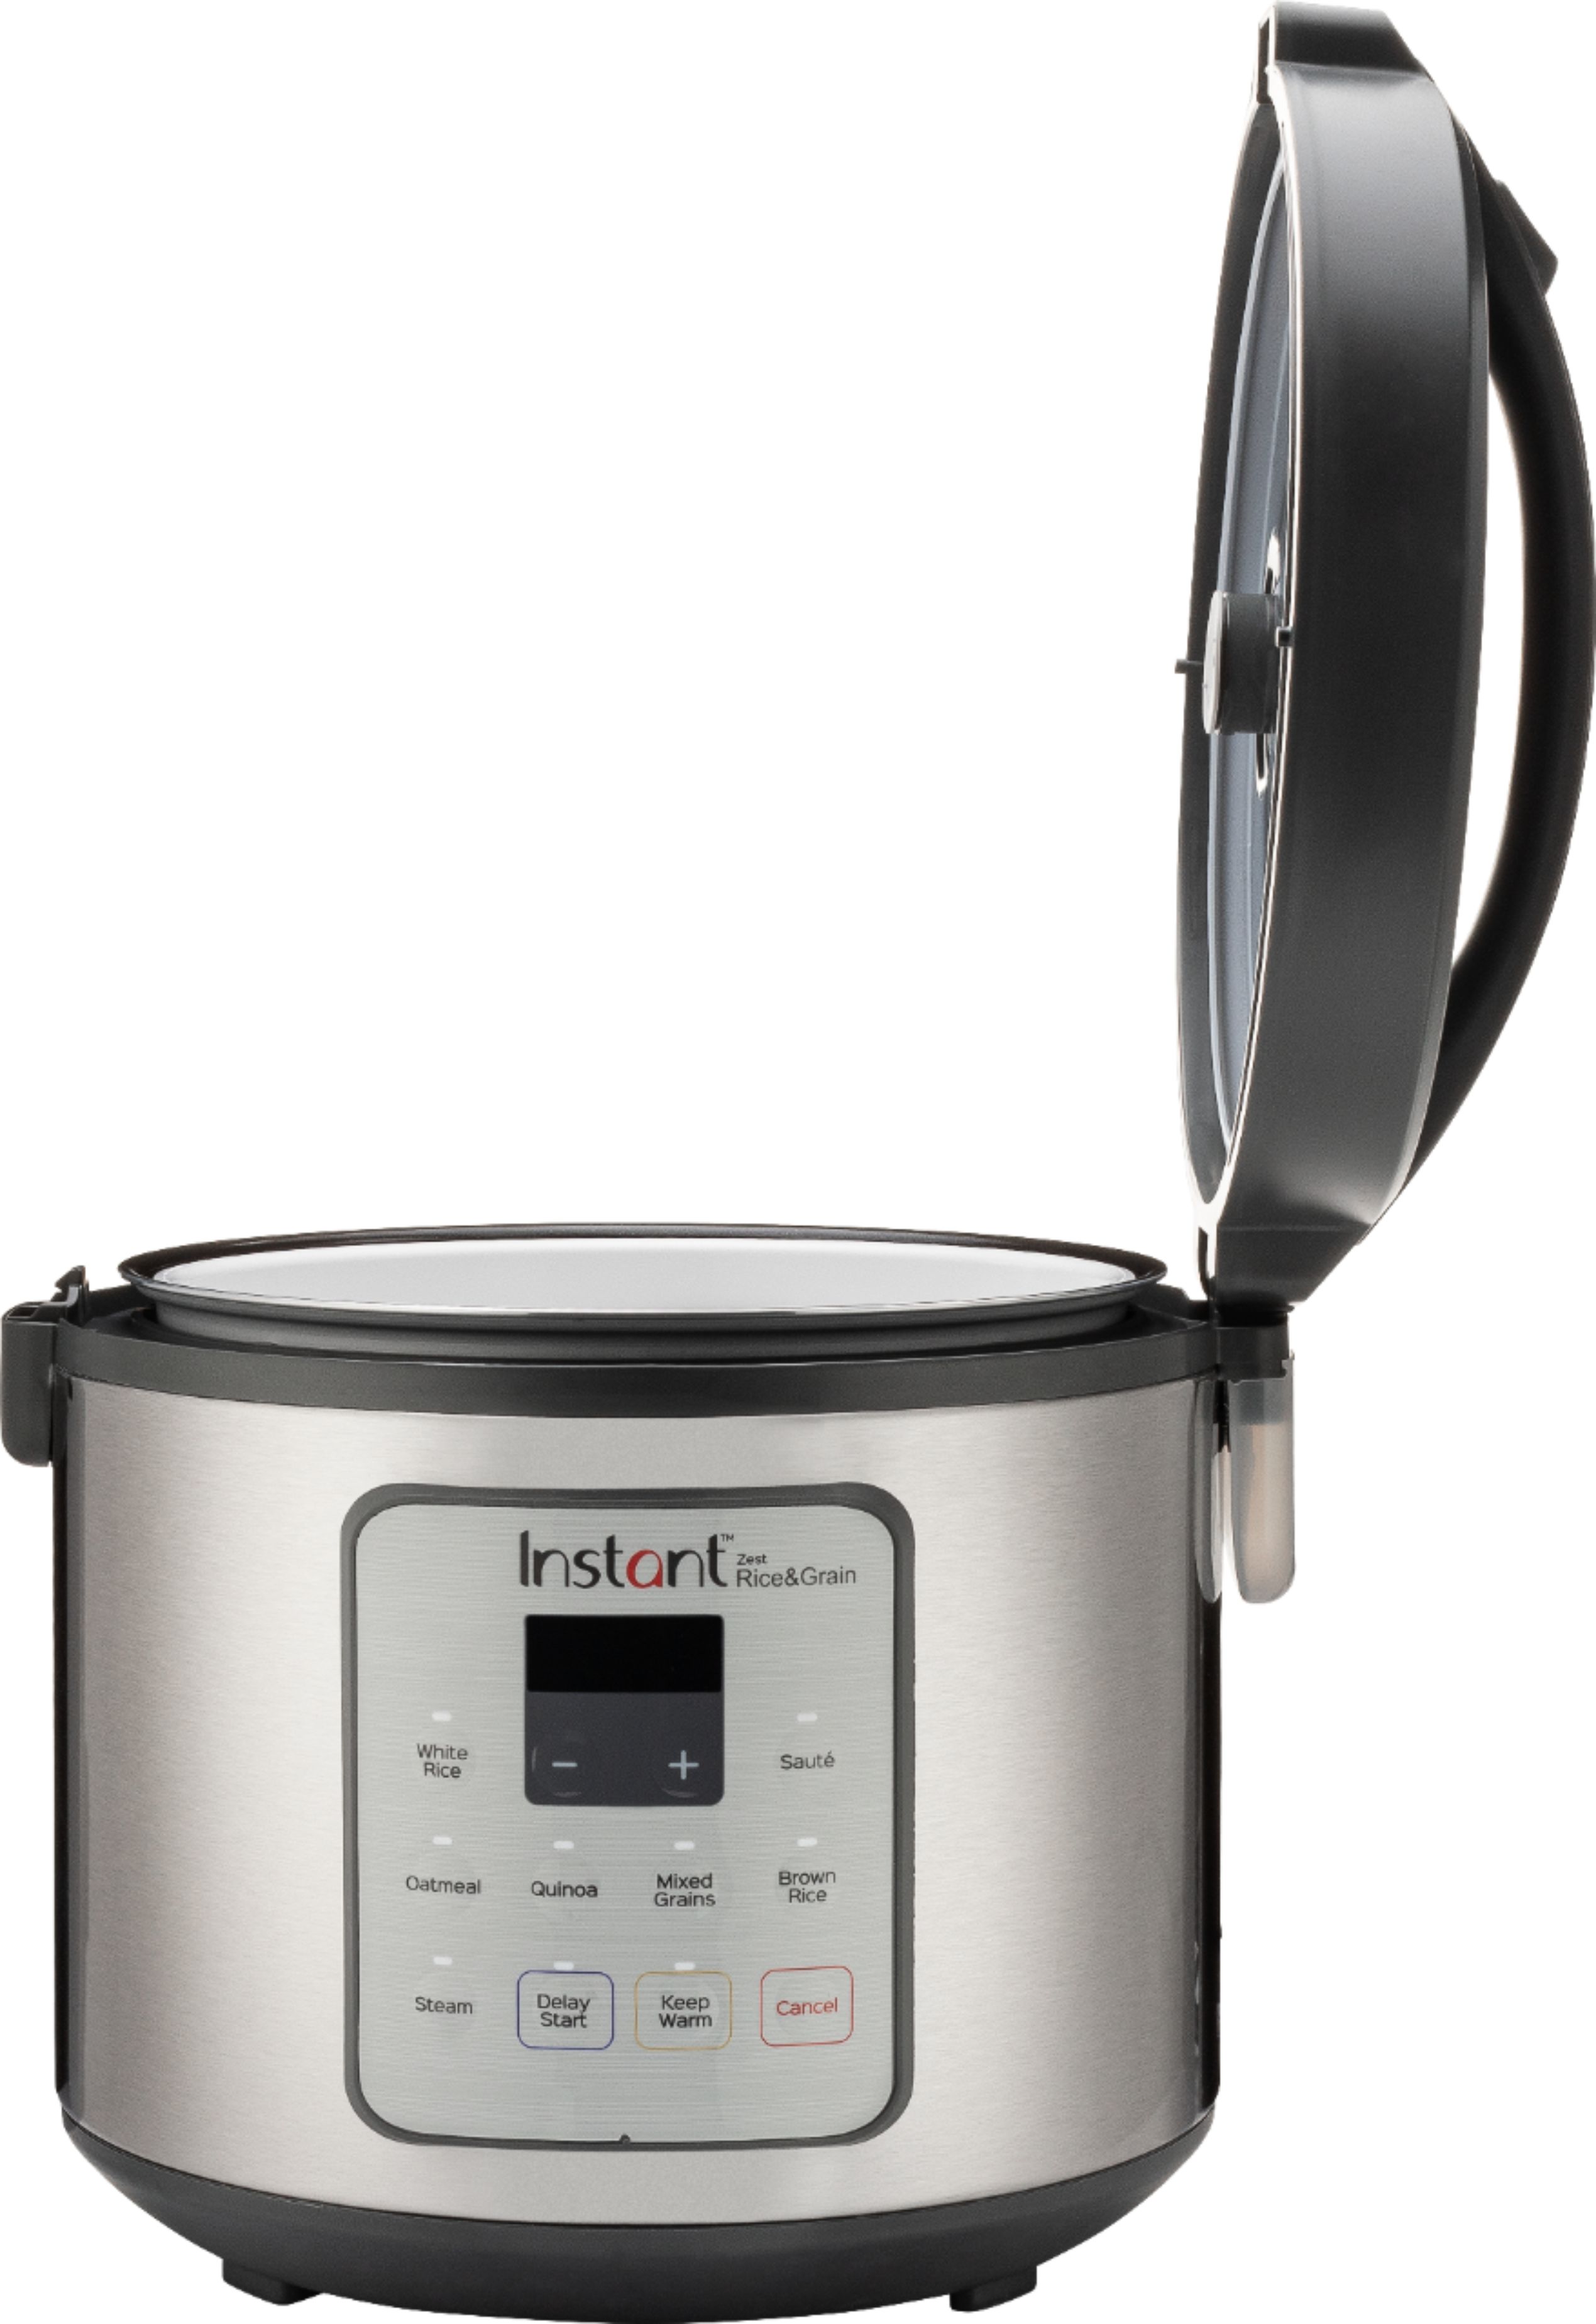 Best Buy: Insignia™ 20-Cup Rice Cooker and Steamer Stainless Steel  NS-RC20CSS1